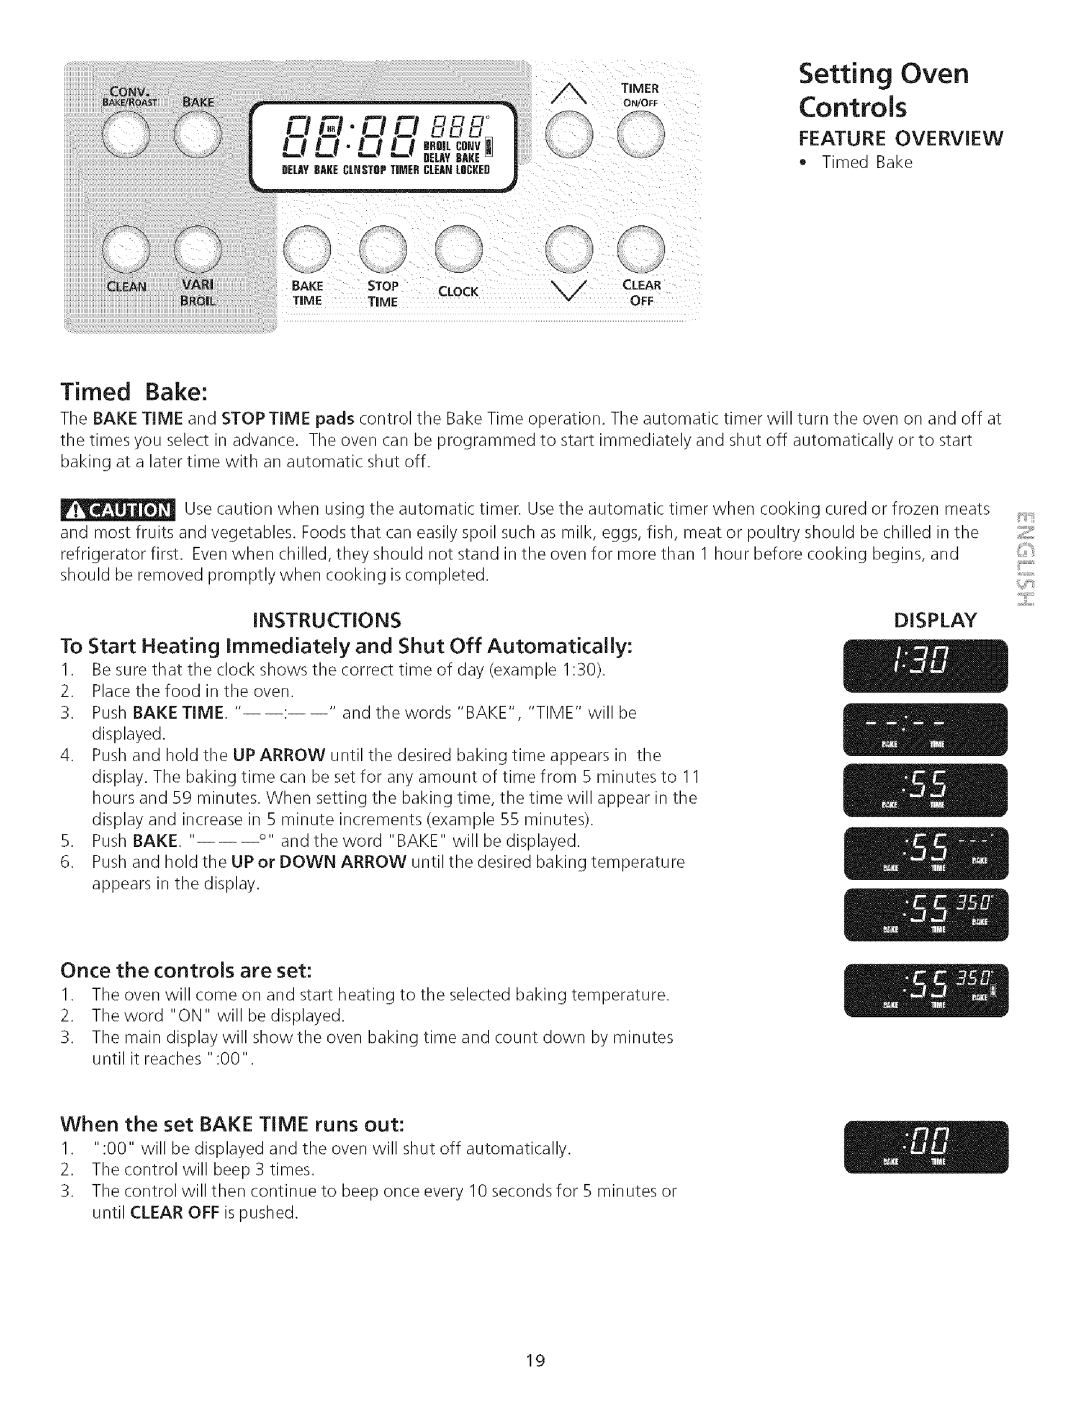 Kenmore 790.75503 Timed Bake, Controls, Setting Oven, Feature Overview, Display, Once the controls are set, Instructions 